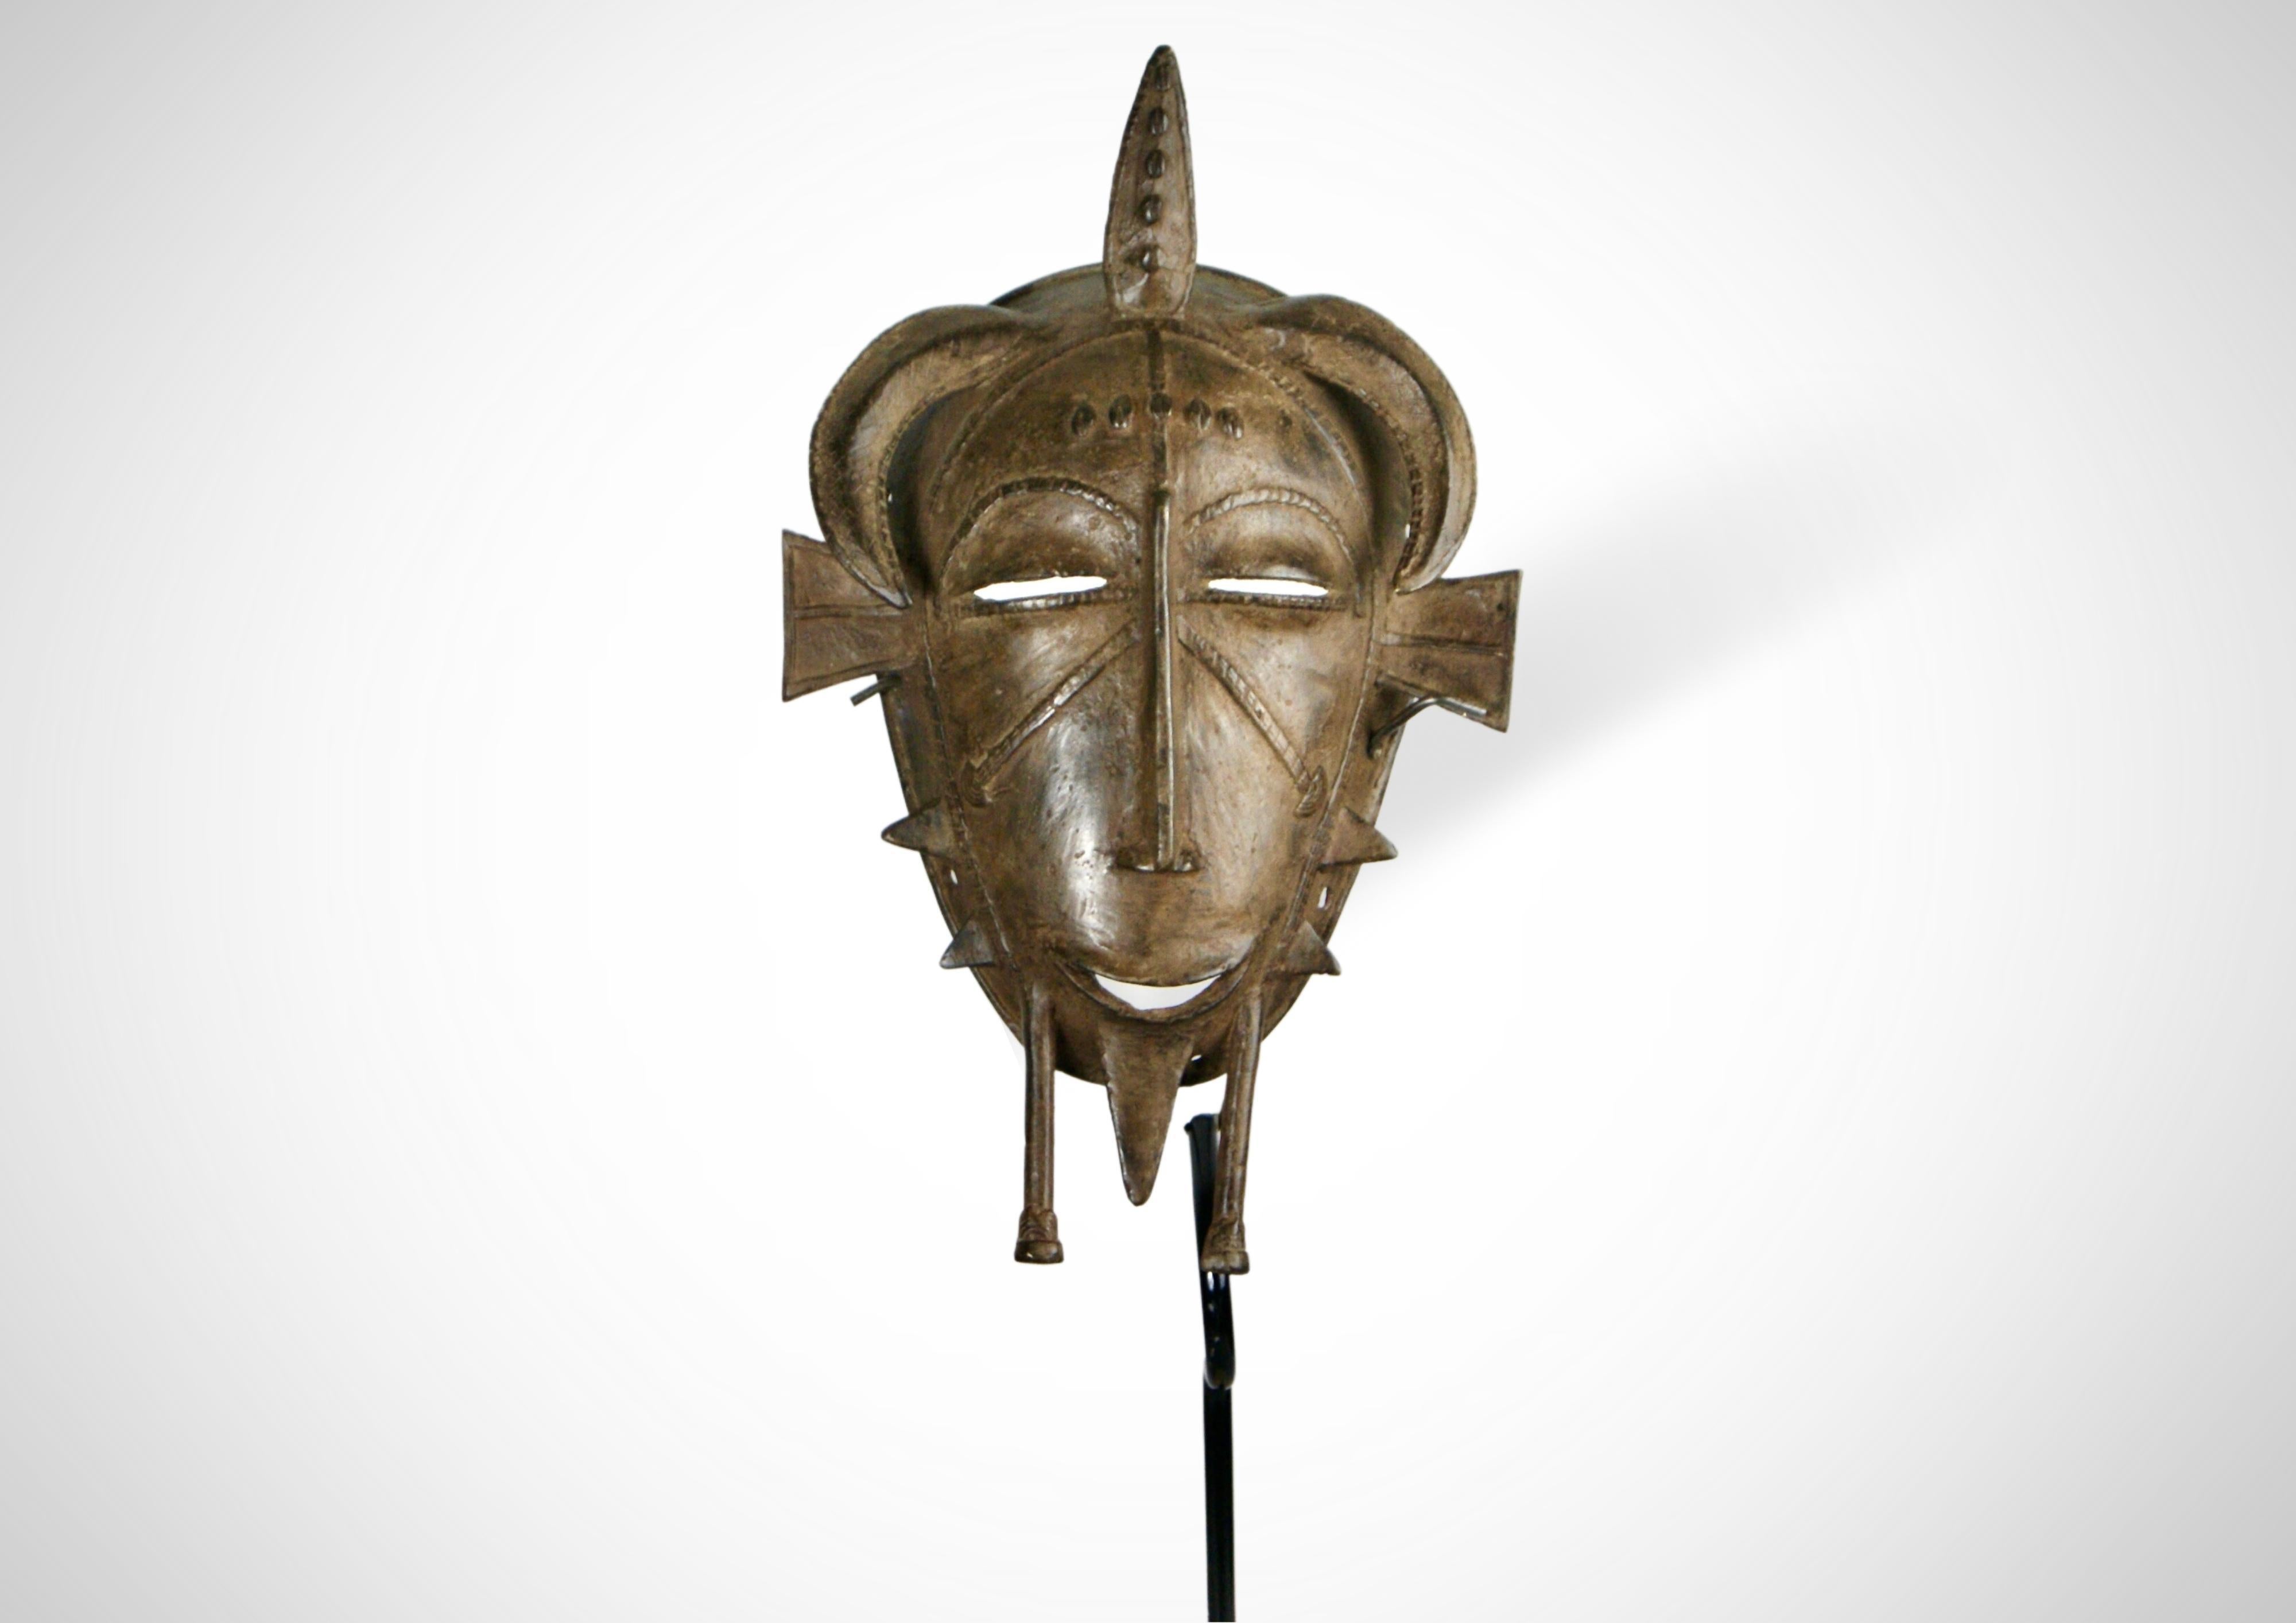 Ancestral Senufo cast bronze face mask (Kpelie) from Côte d'Ivoire West Africa.
Made using the lost wax technique.
Traditionally, the 'Kpelie' is an ancestral mask worn during funeral rites, initiation ceremonies, weddings and births. 
The function